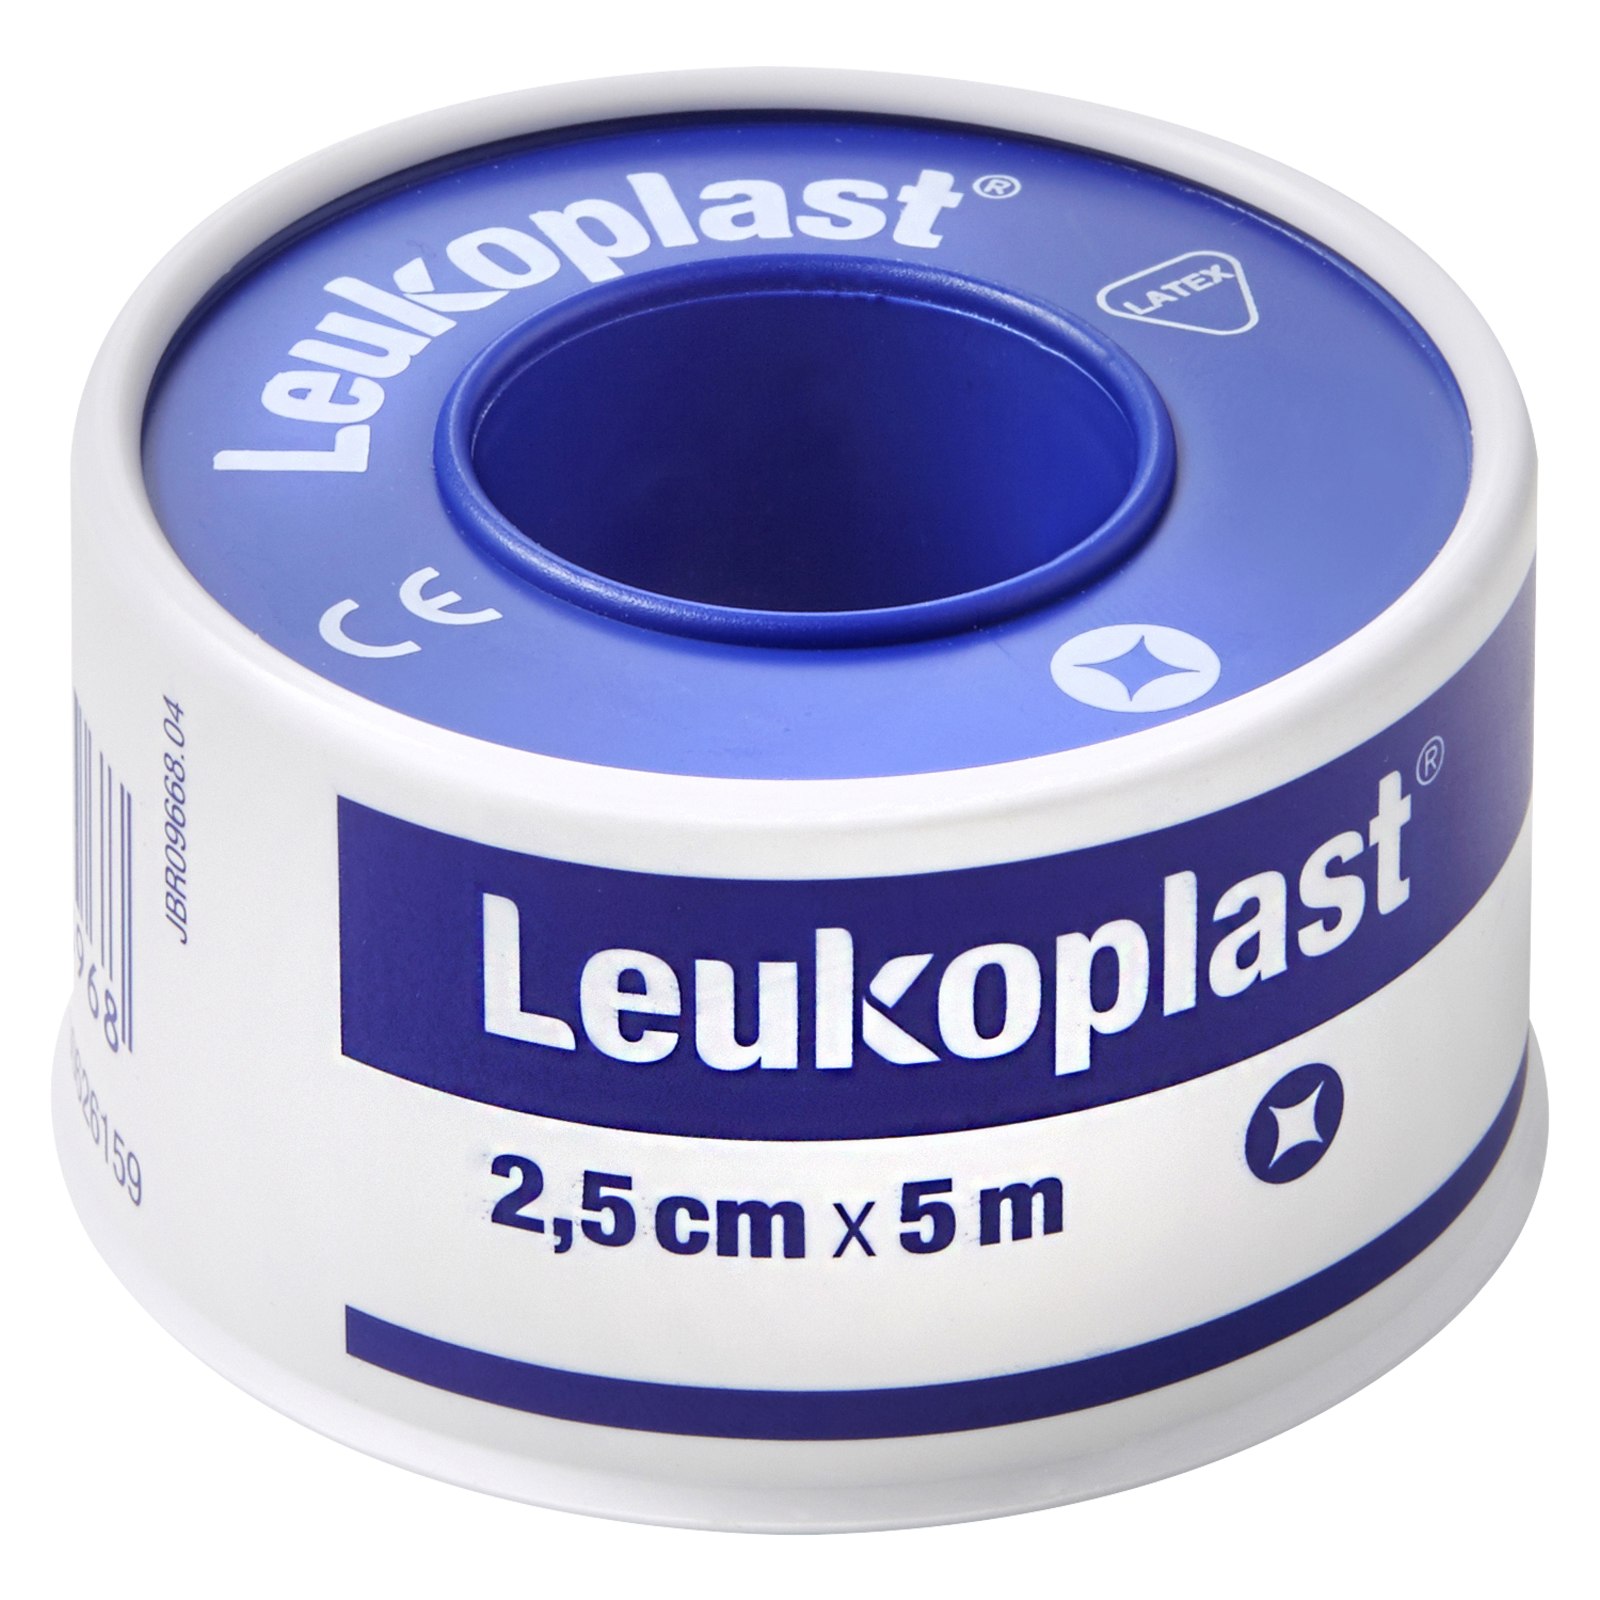 Leukoplast® resistant 5,0 m x 2,50 - GEHWOL: Foot care products for foot enthusiasts